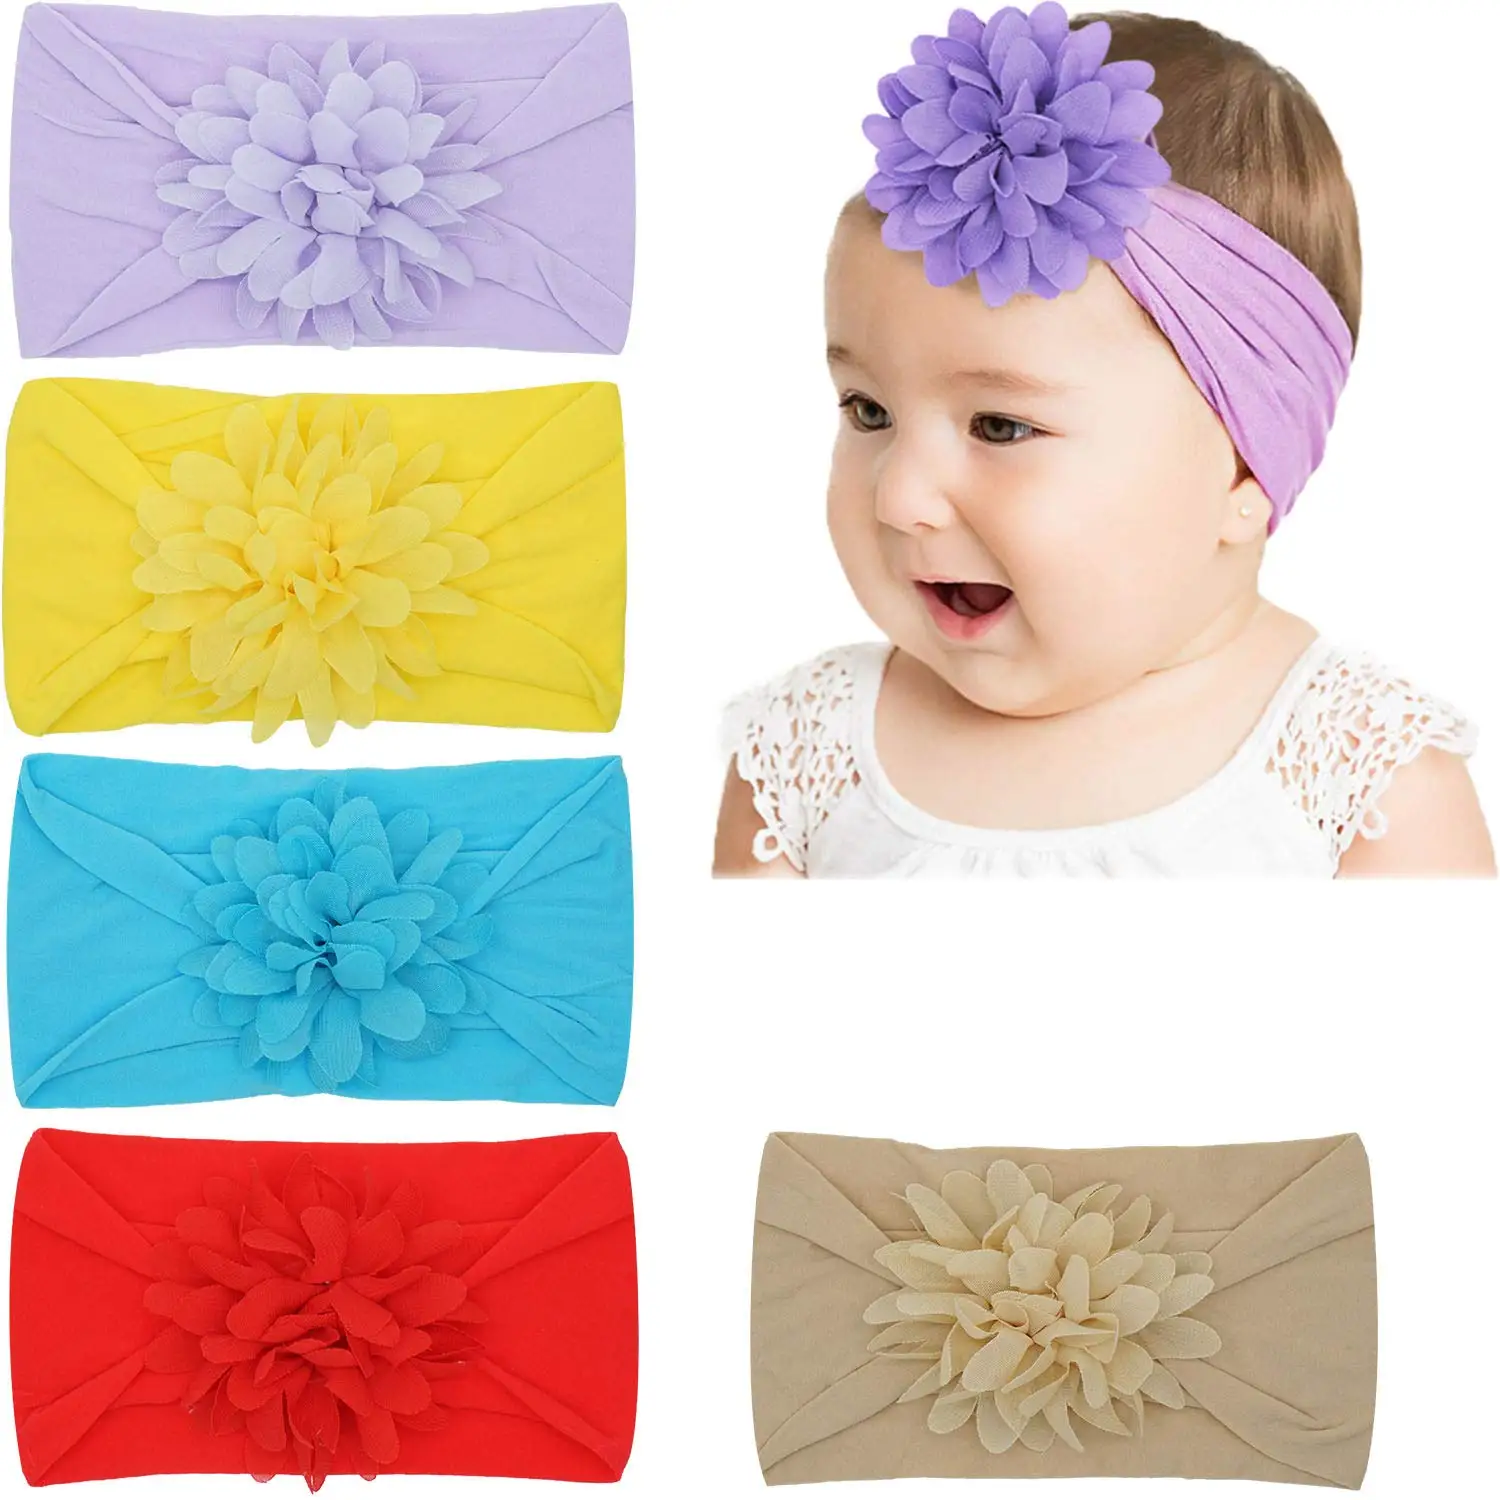 

20 Pcs Baby Girls Nylon Headbands Chiffon Flower Soft Stretchy Hair Band Hair Accessories for Newborns Infants Toddlers